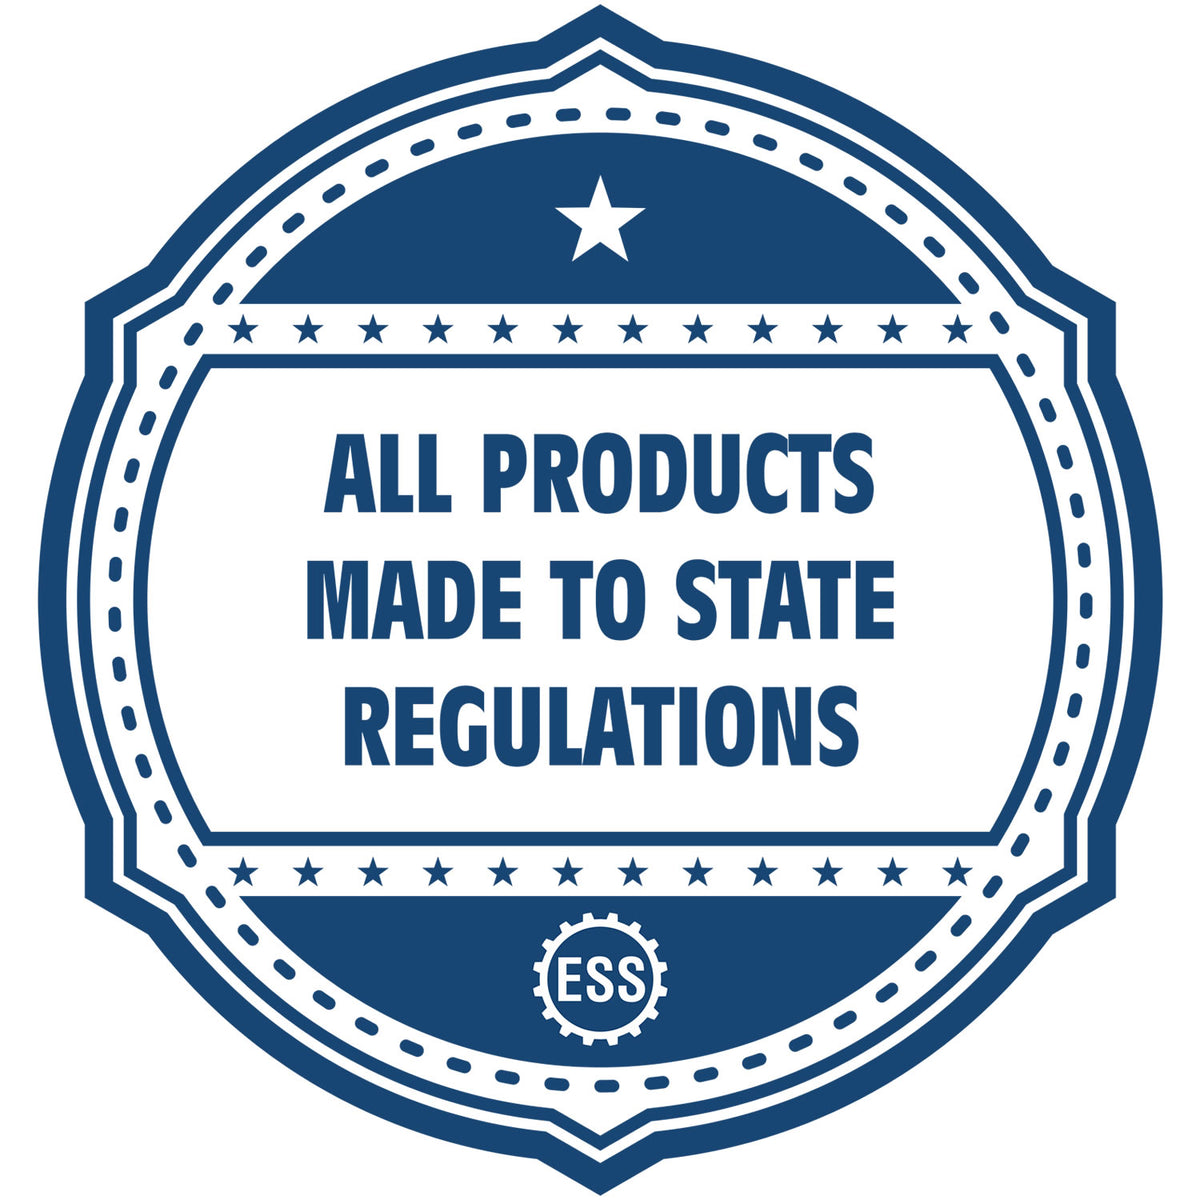 An icon or badge element for the Digital Illinois Landscape Architect Stamp showing that this product is made in compliance with state regulations.